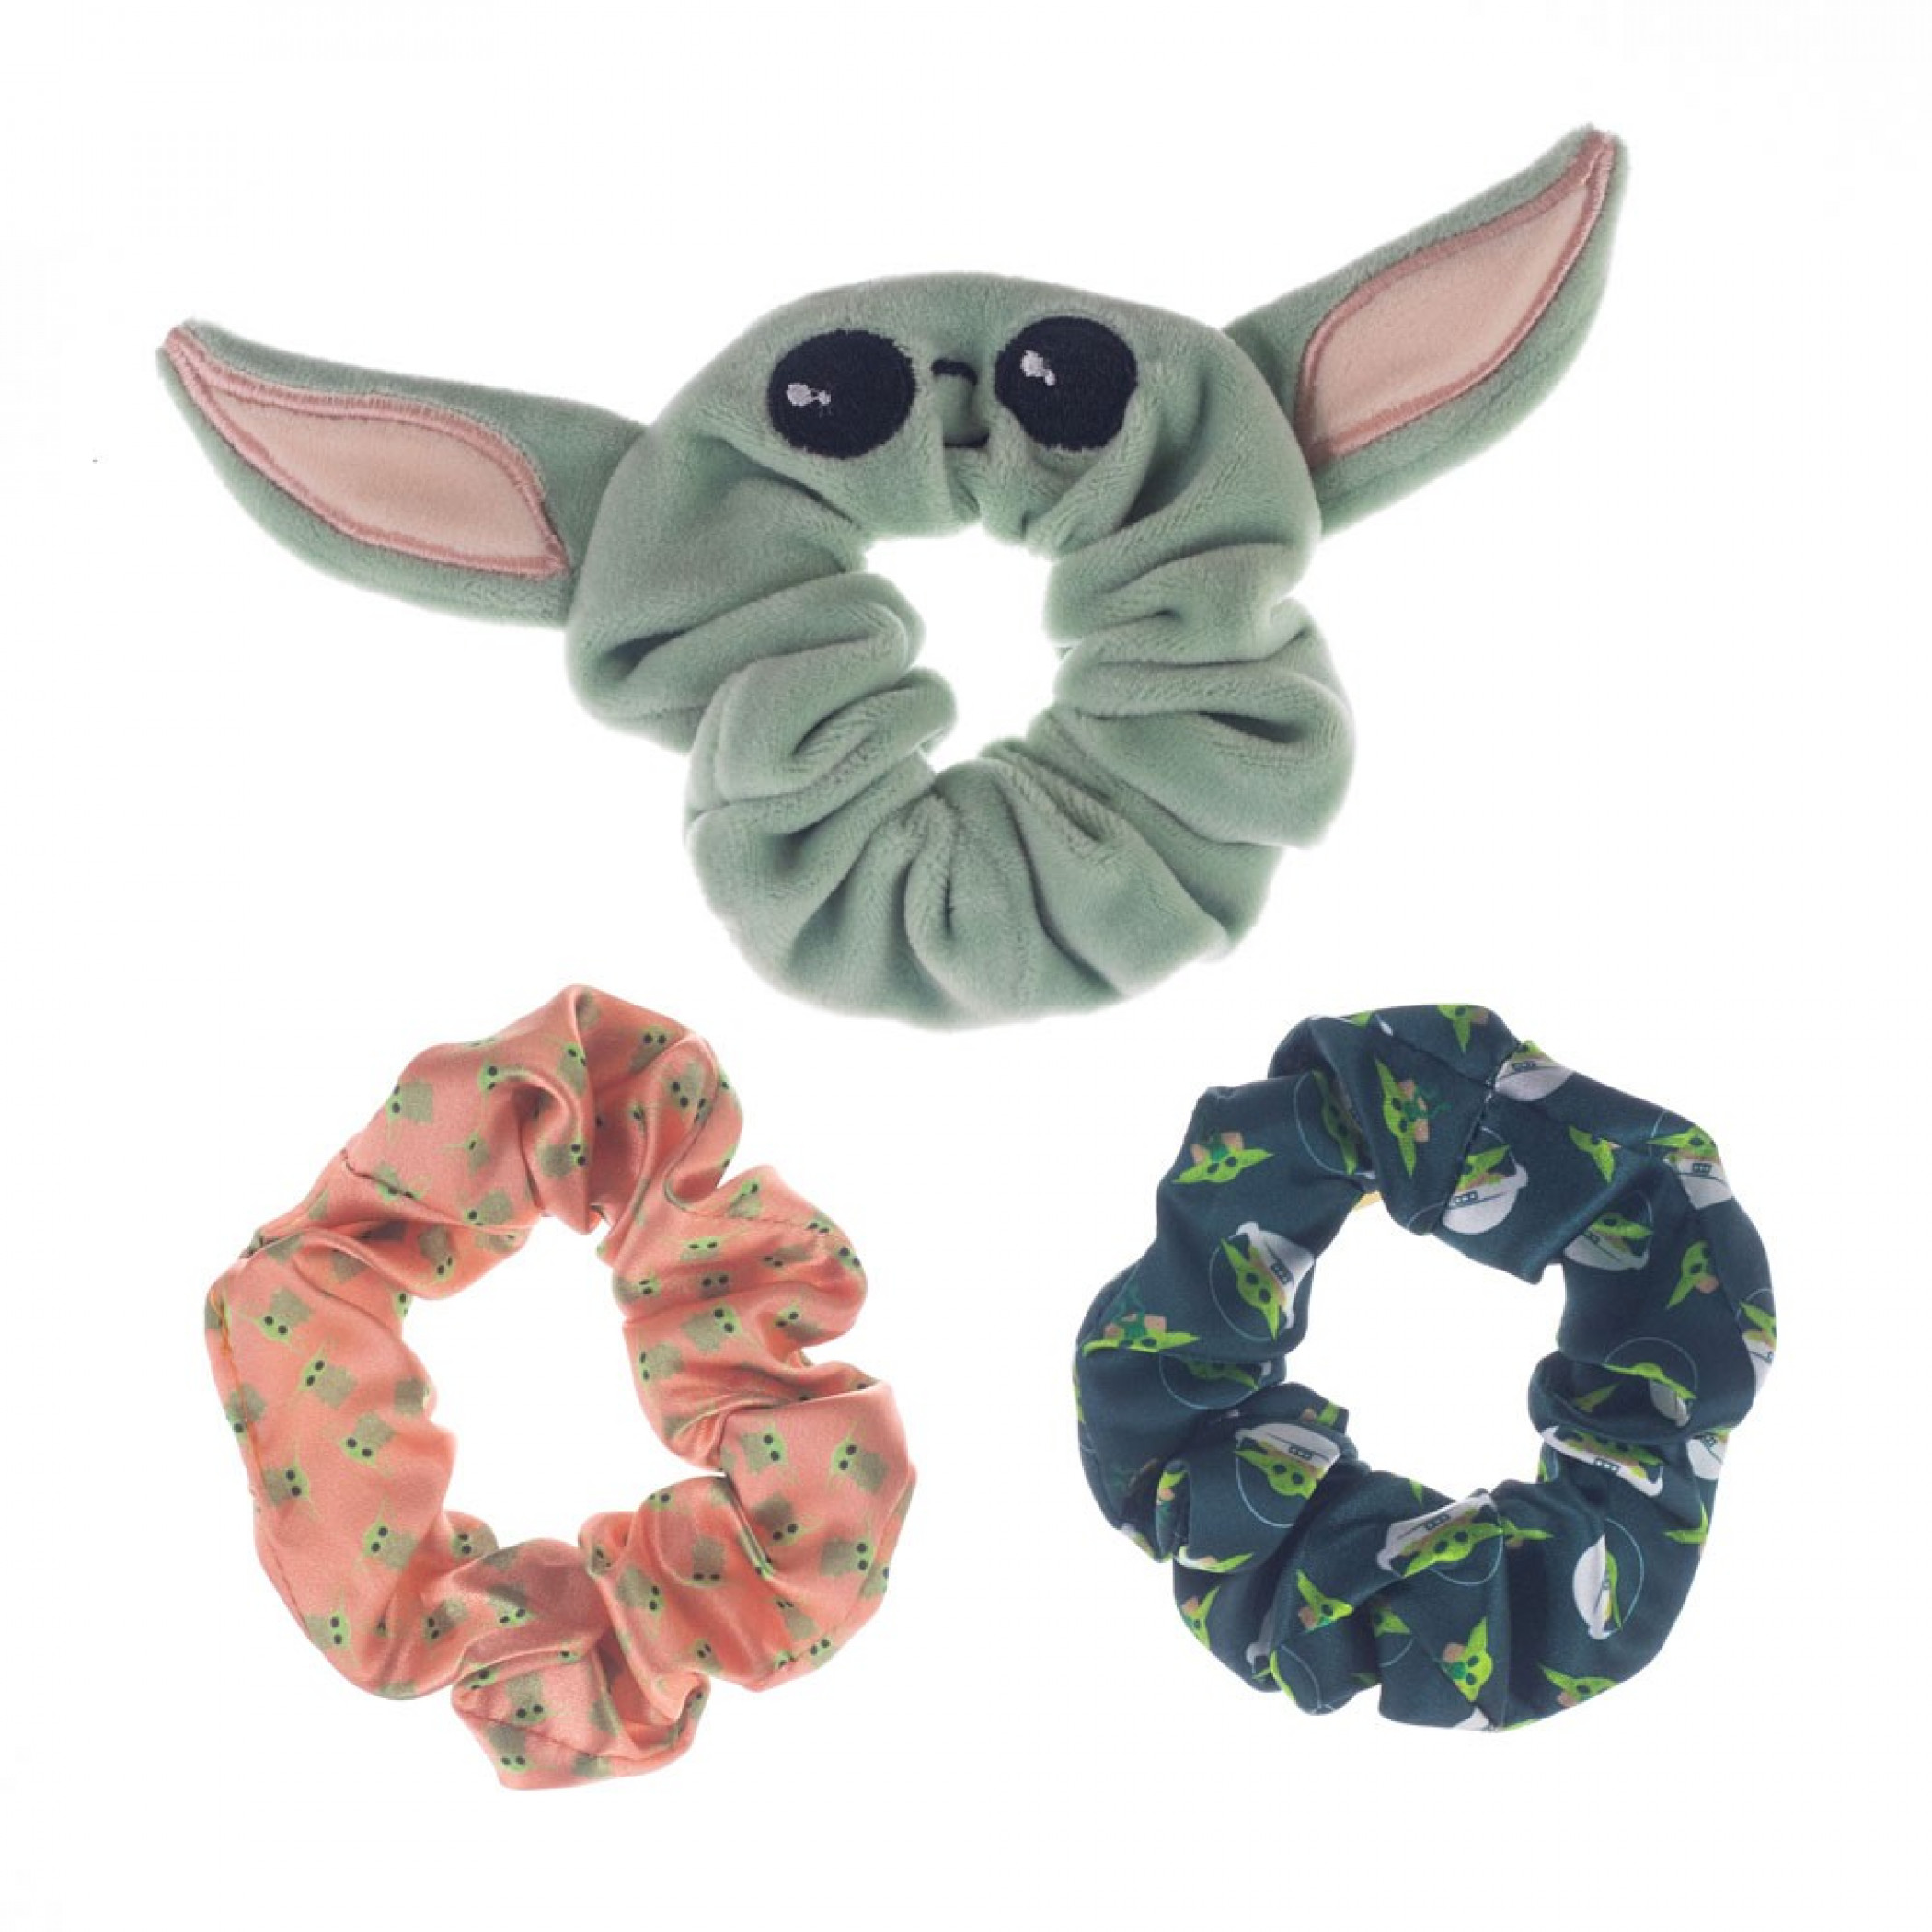 Star Wars The Mandalorian The Child 3-Pack of Scrunchies